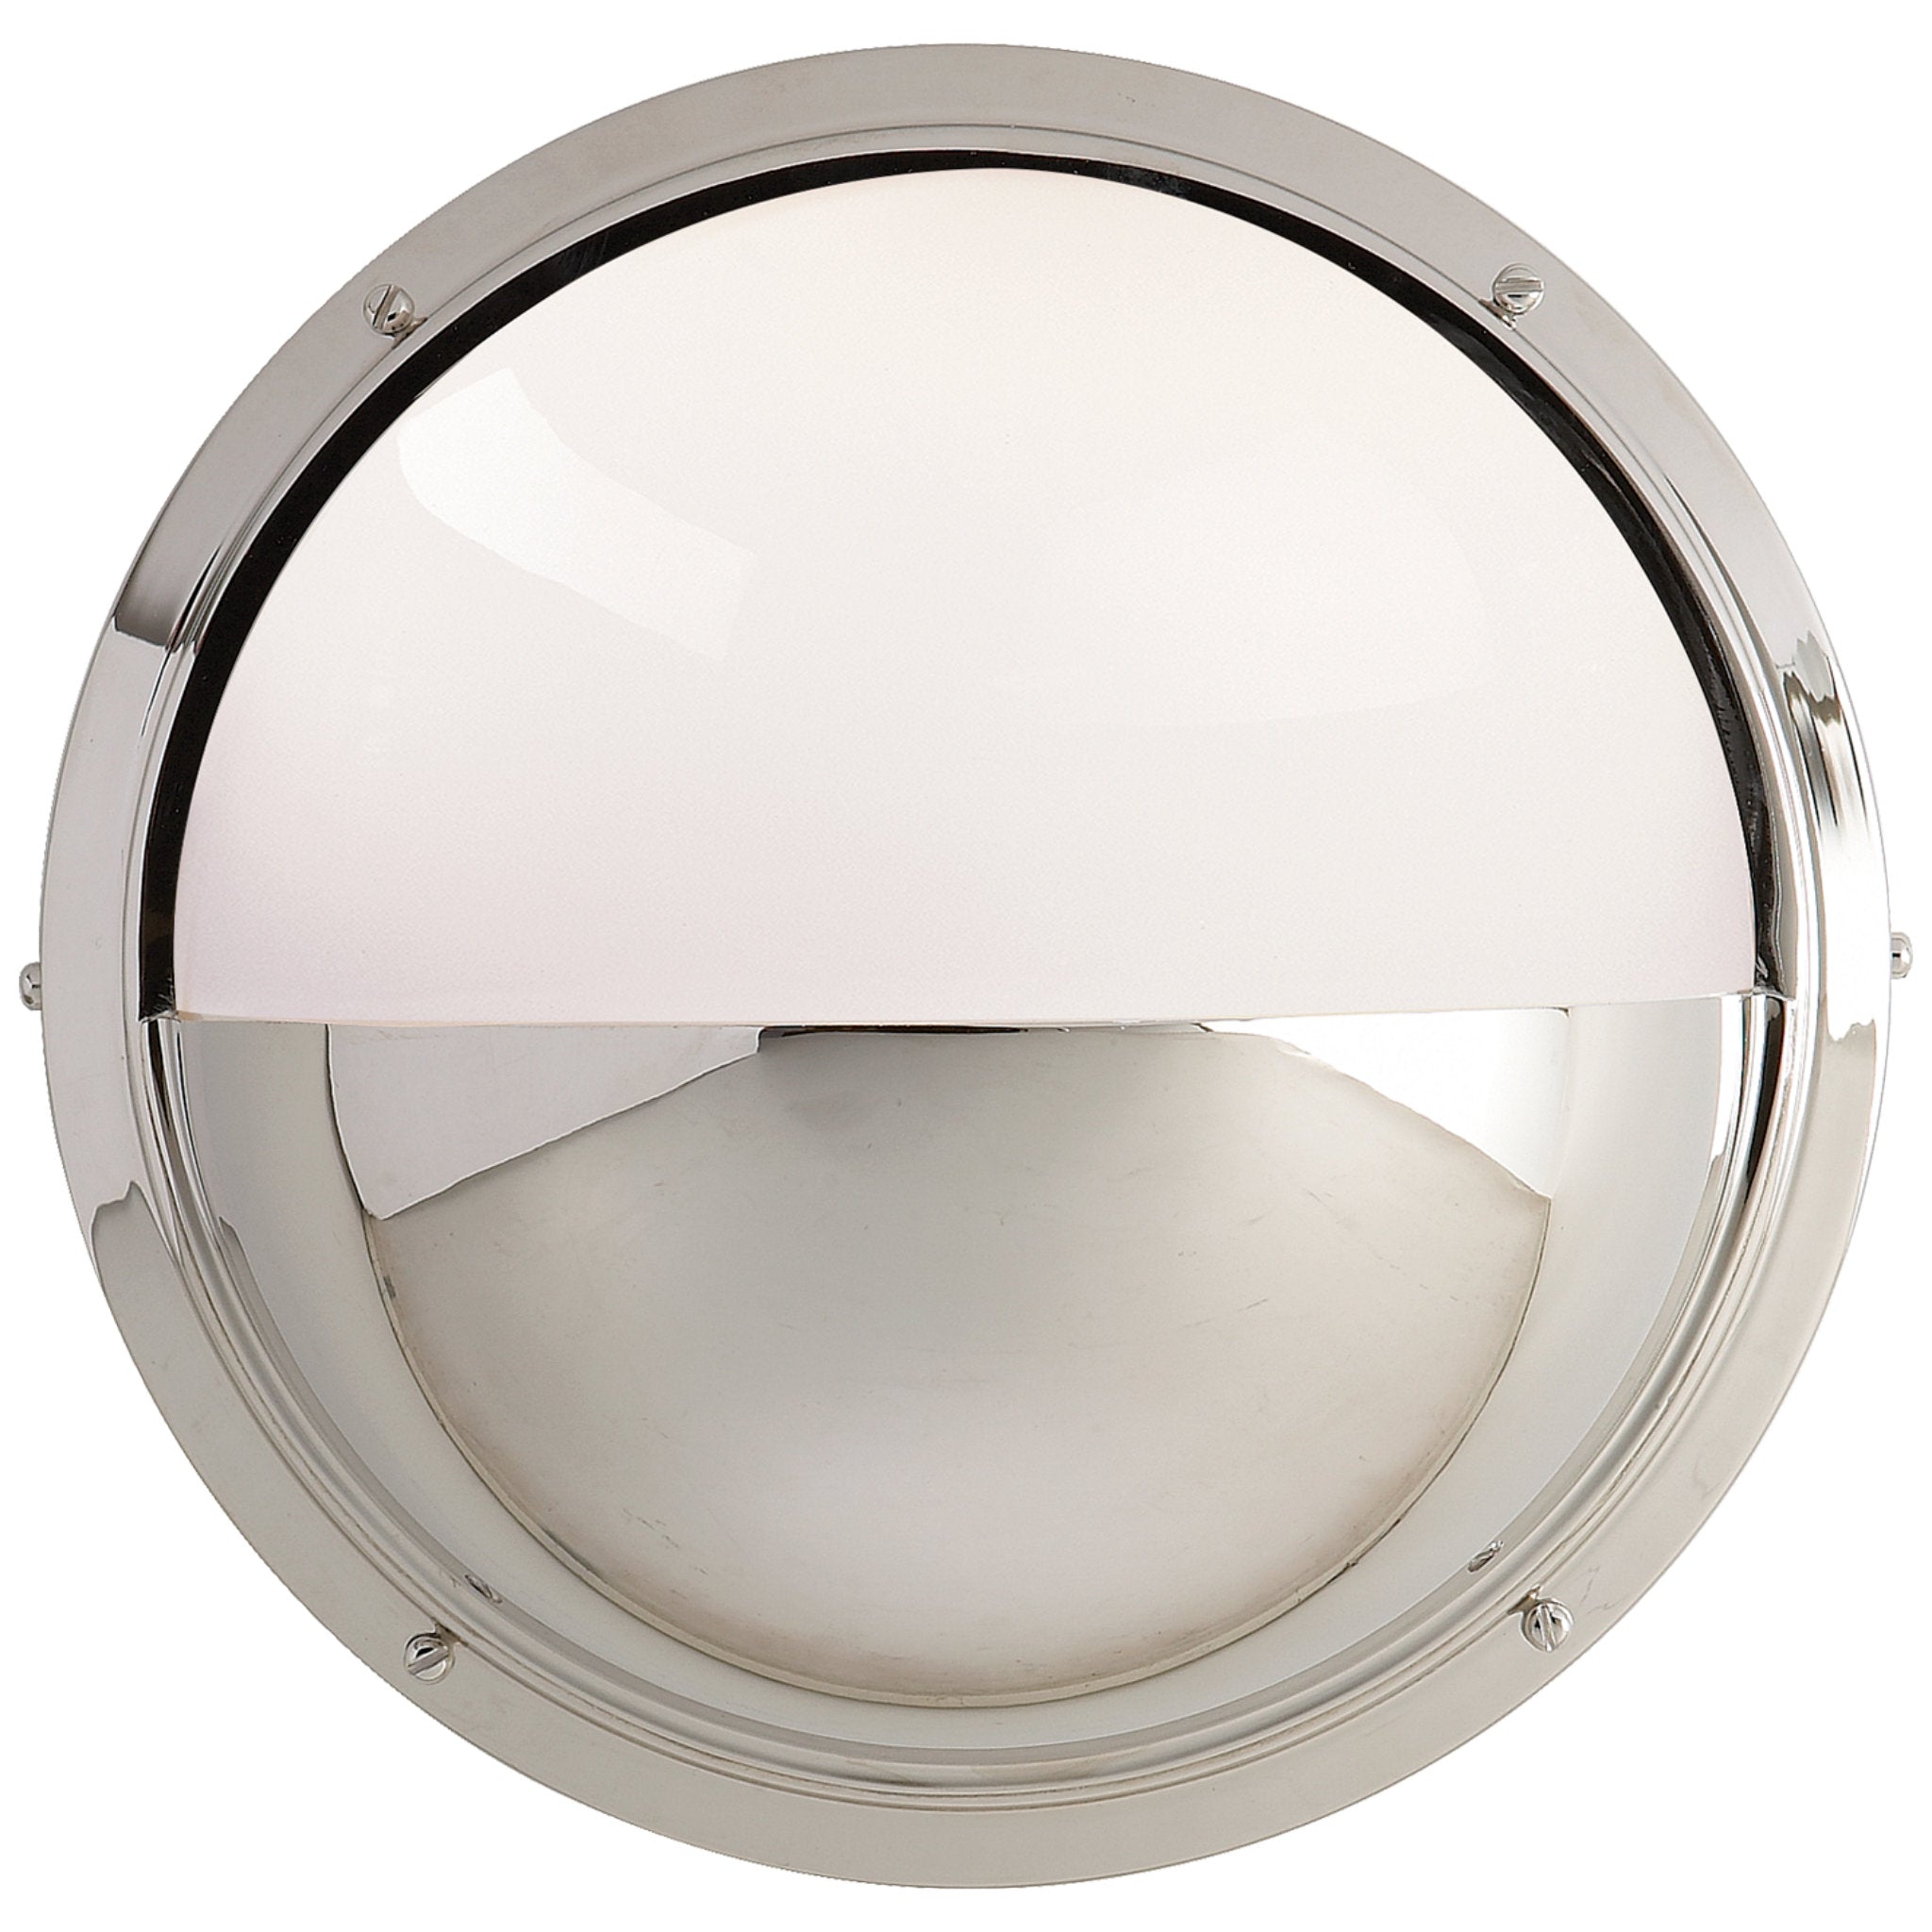 Thomas O'Brien Pelham Moon Light in Polished Nickel with White Glass